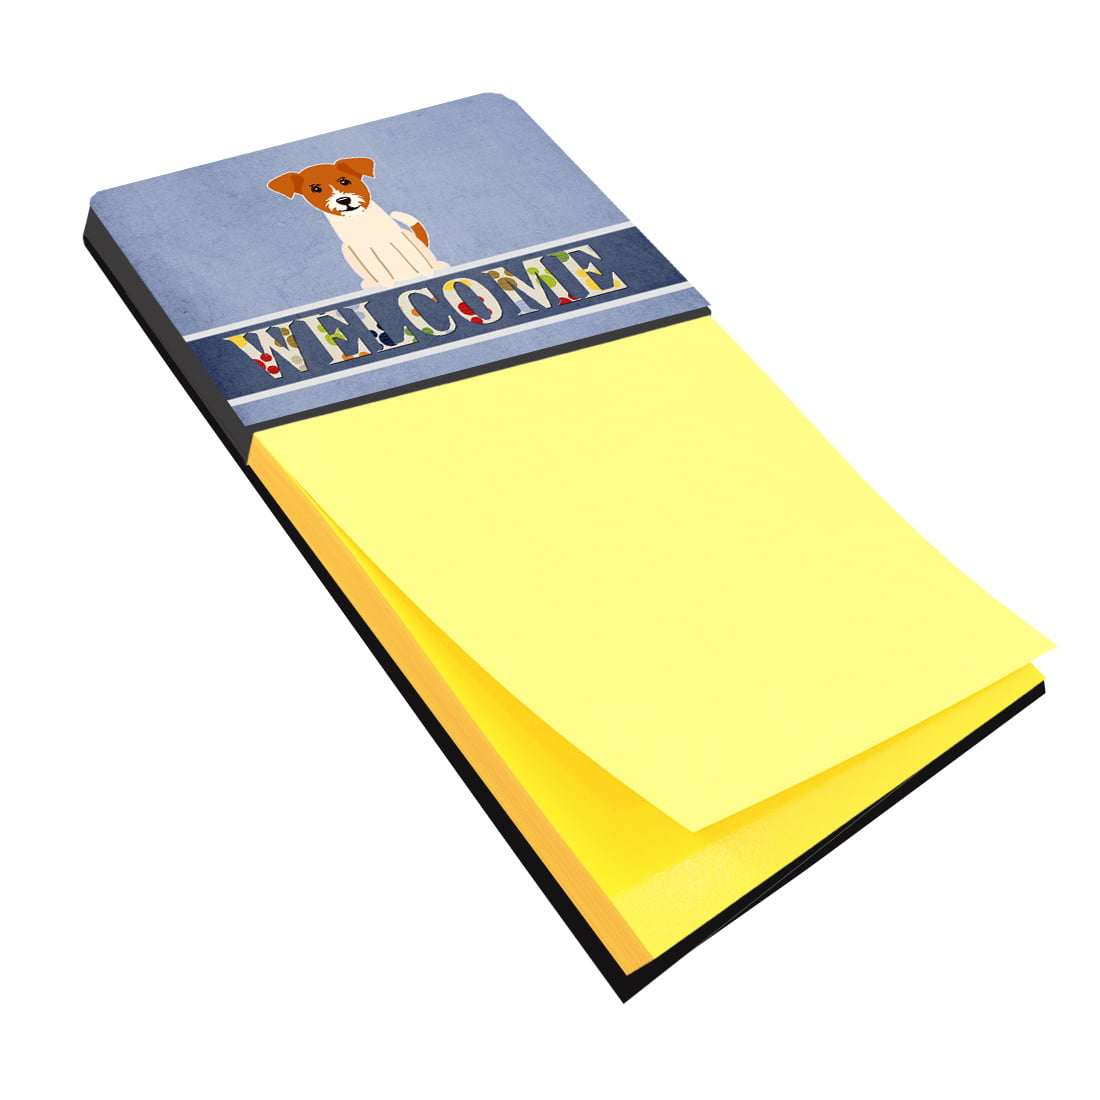 Bb5689sn Jack Russell Terrier Welcome Sticky Note Holder